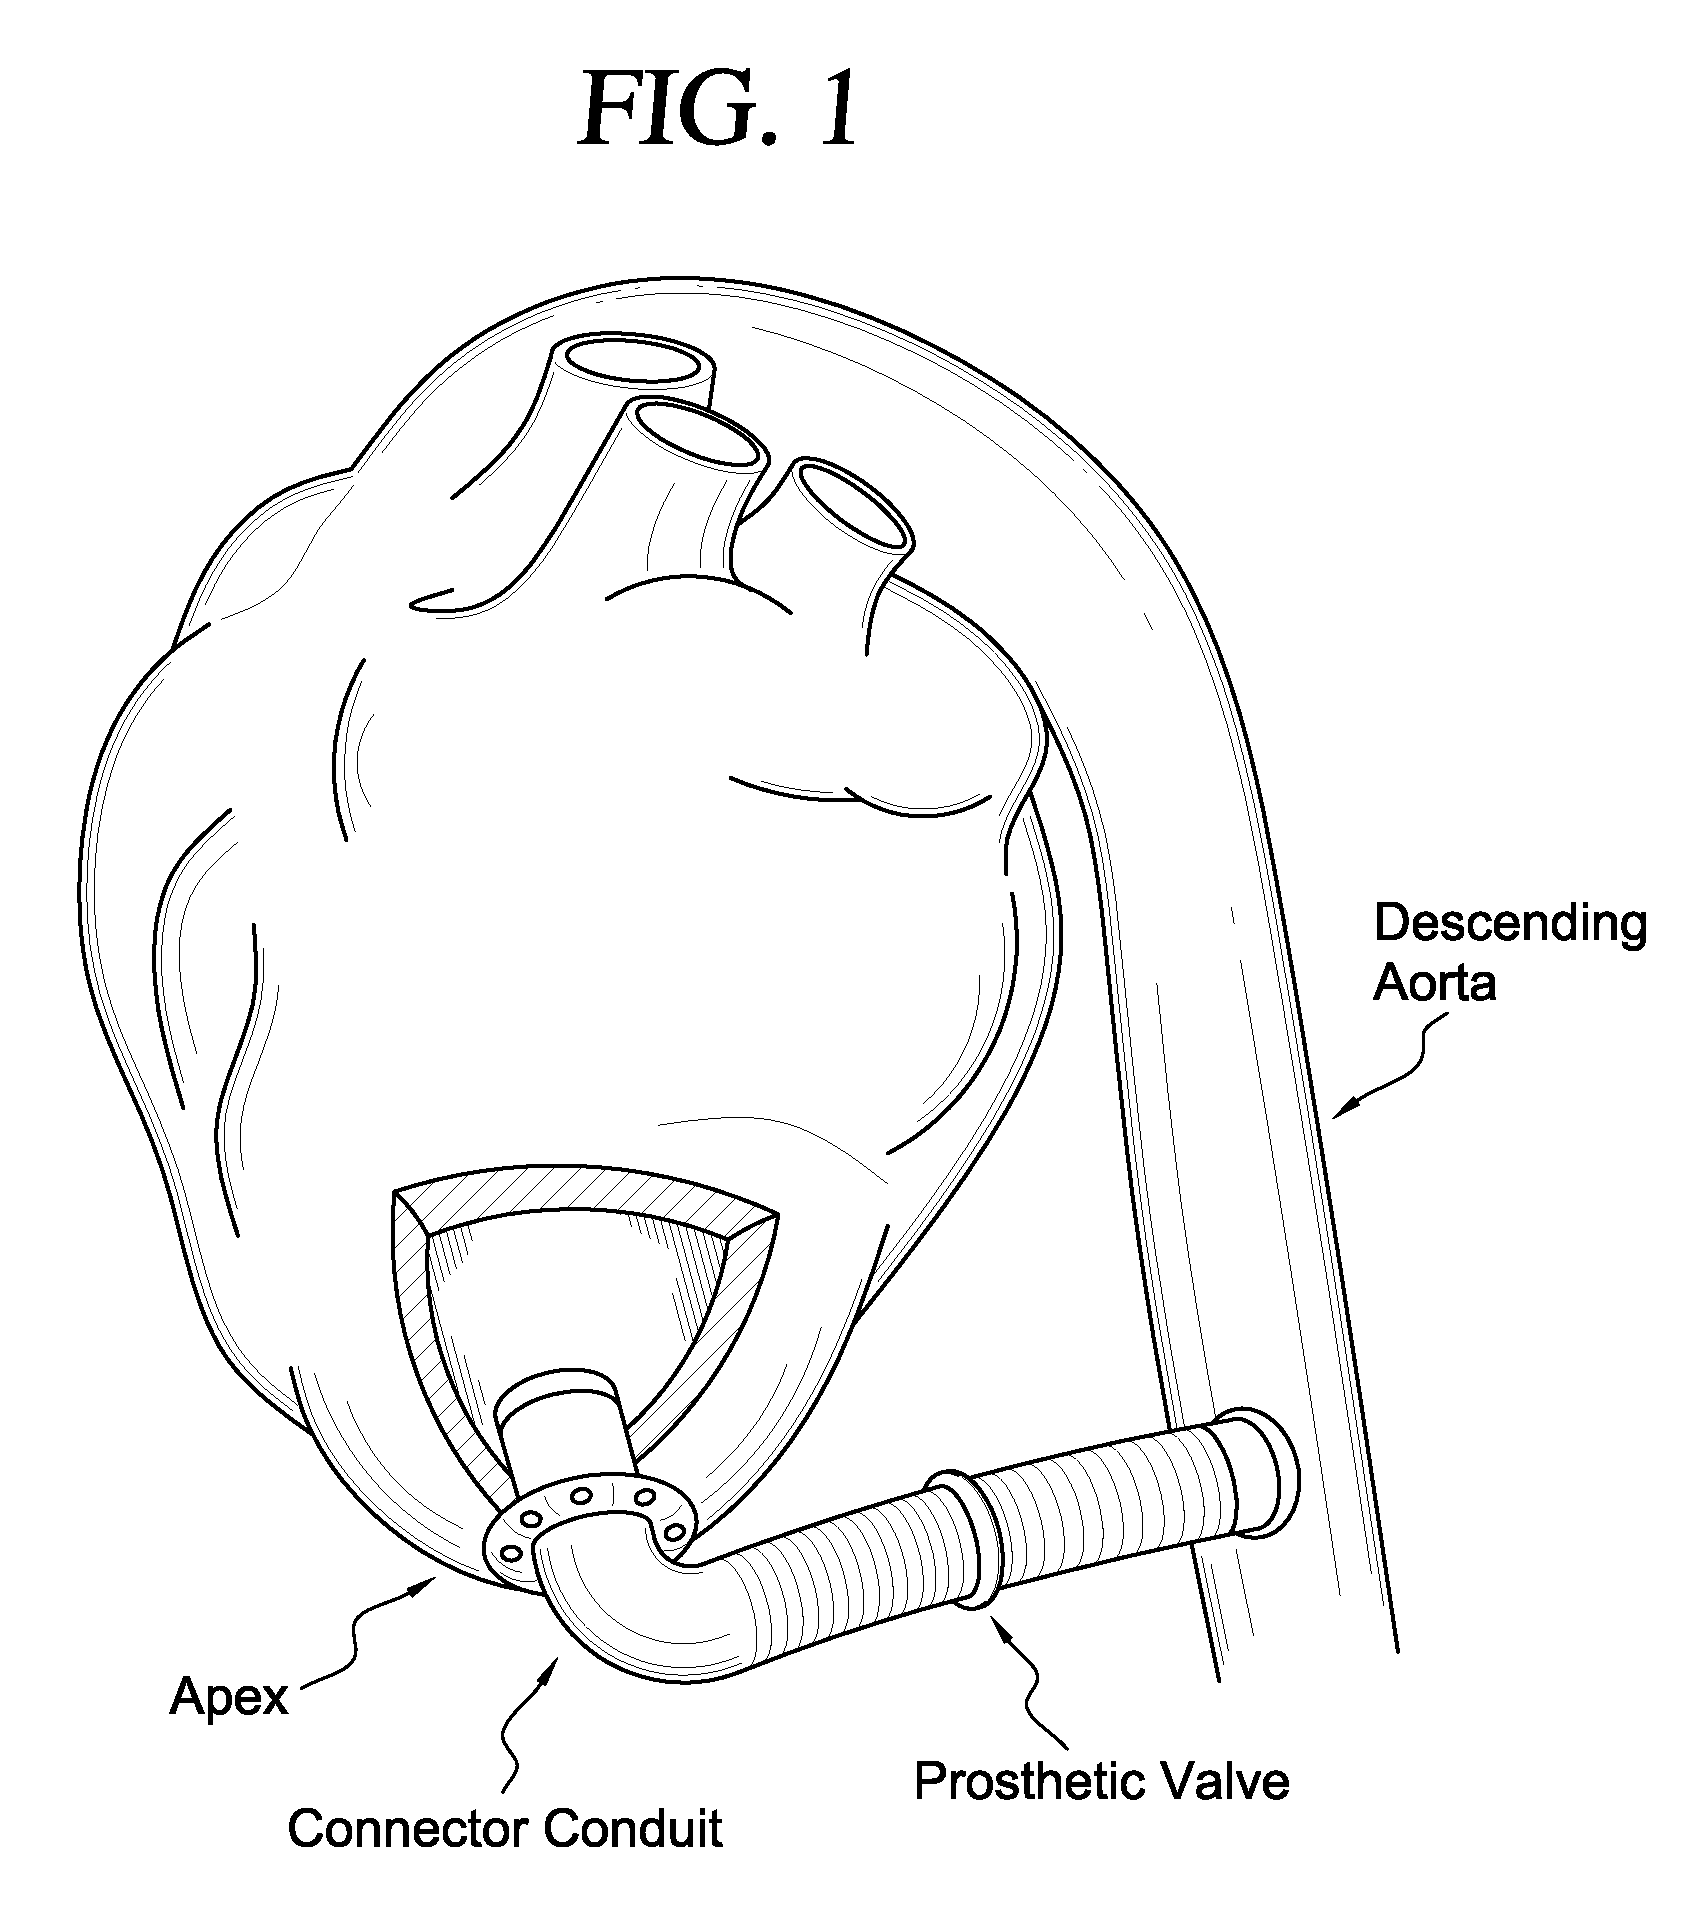 Apparatus and method for suturelessly connecting a conduit to a hollow organ